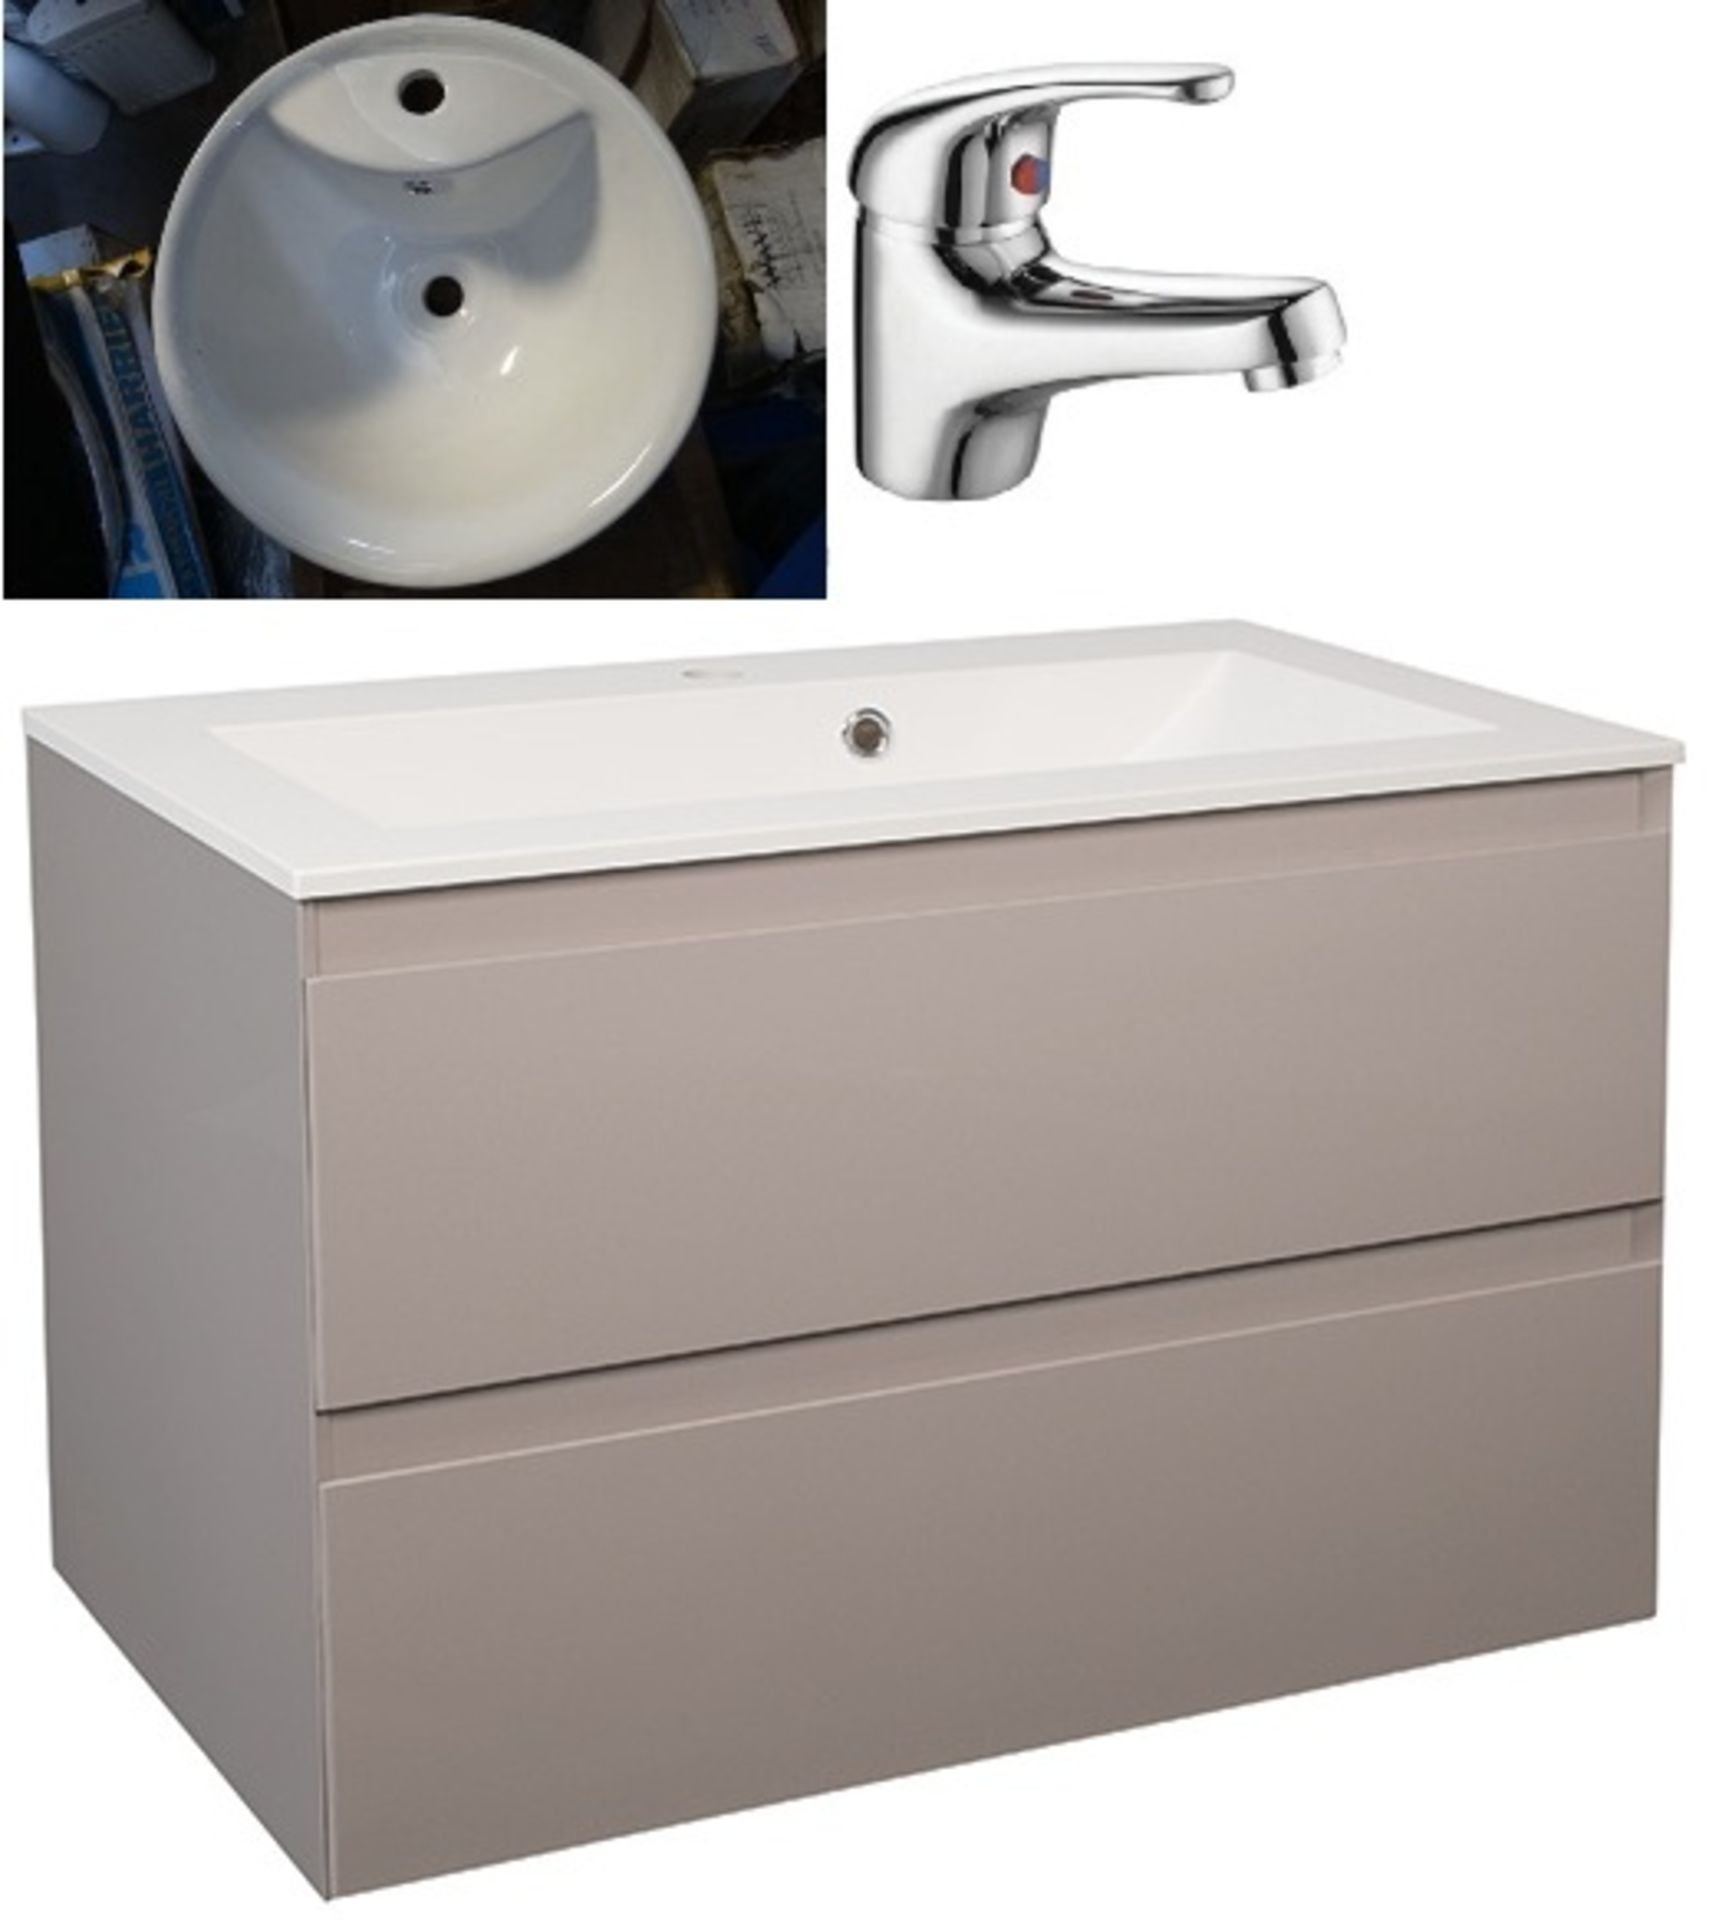 RRP - £500, 2 drawer 700 vanity unit, soft close high quality unit, white ceramic wash bowl and sing